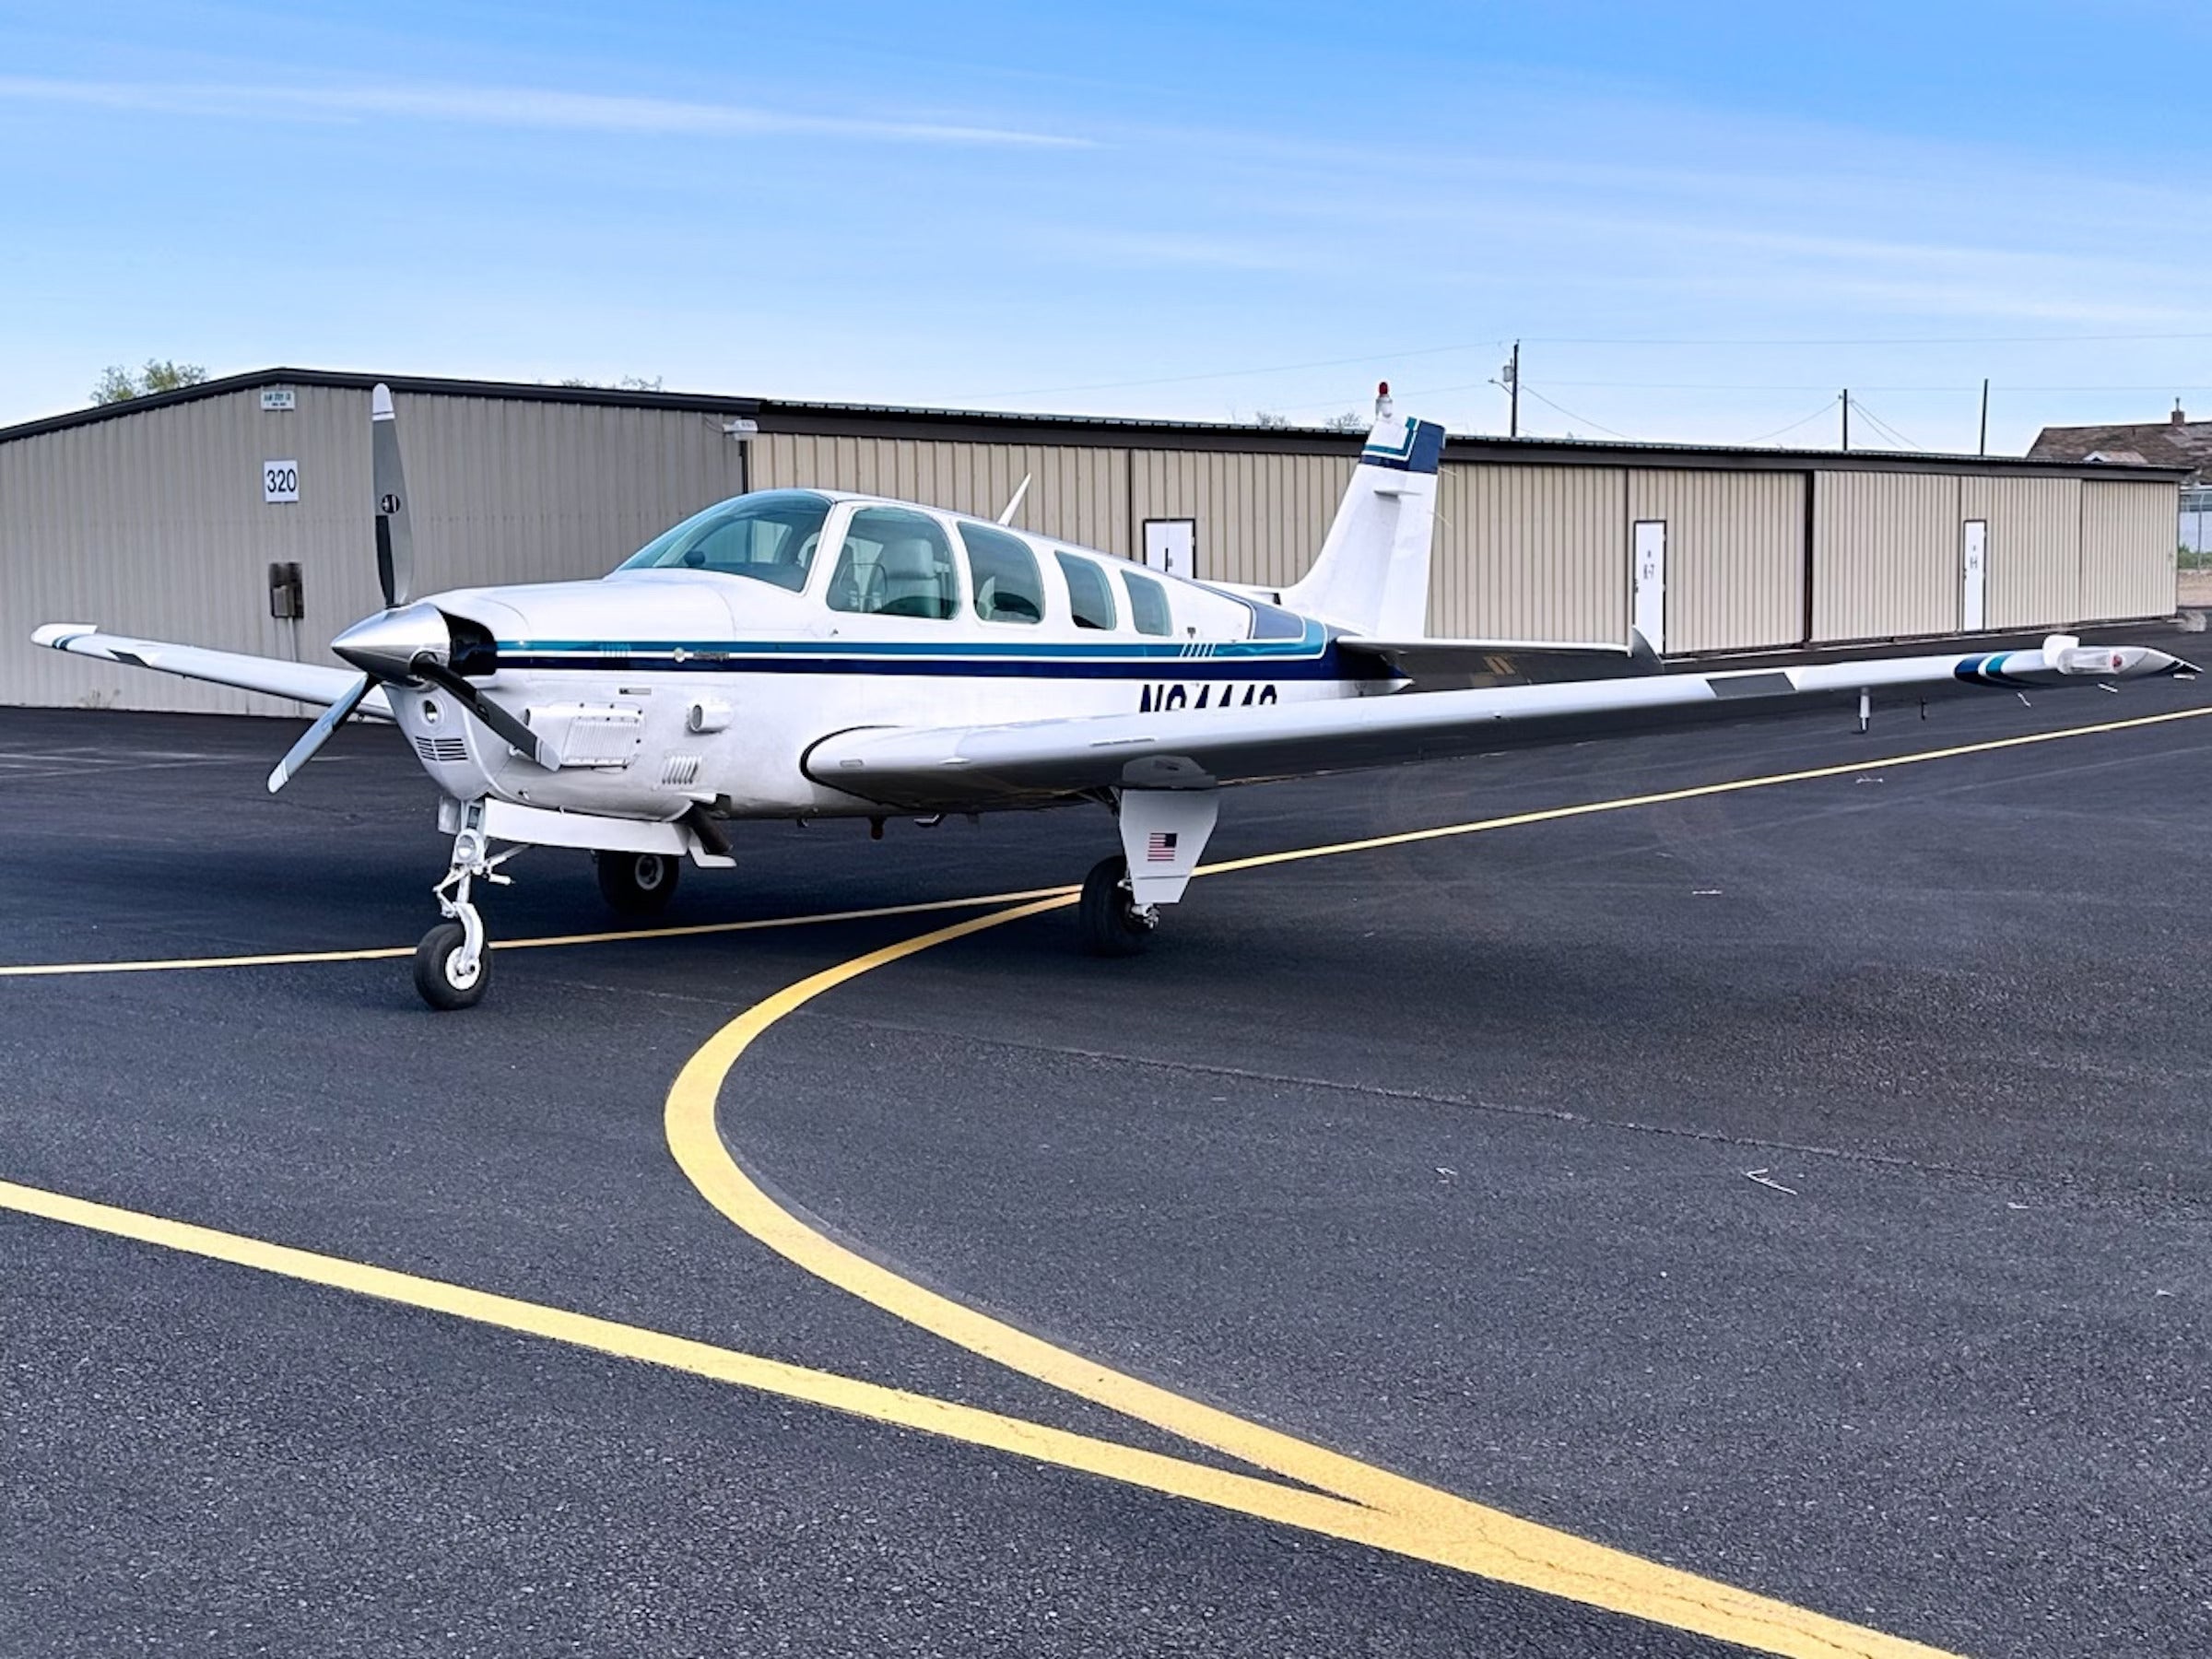 This 1982 Beechcraft B36TC Bonanza Is a High-Flying, Turbocharged ‘AircraftForSale’ Top Pick